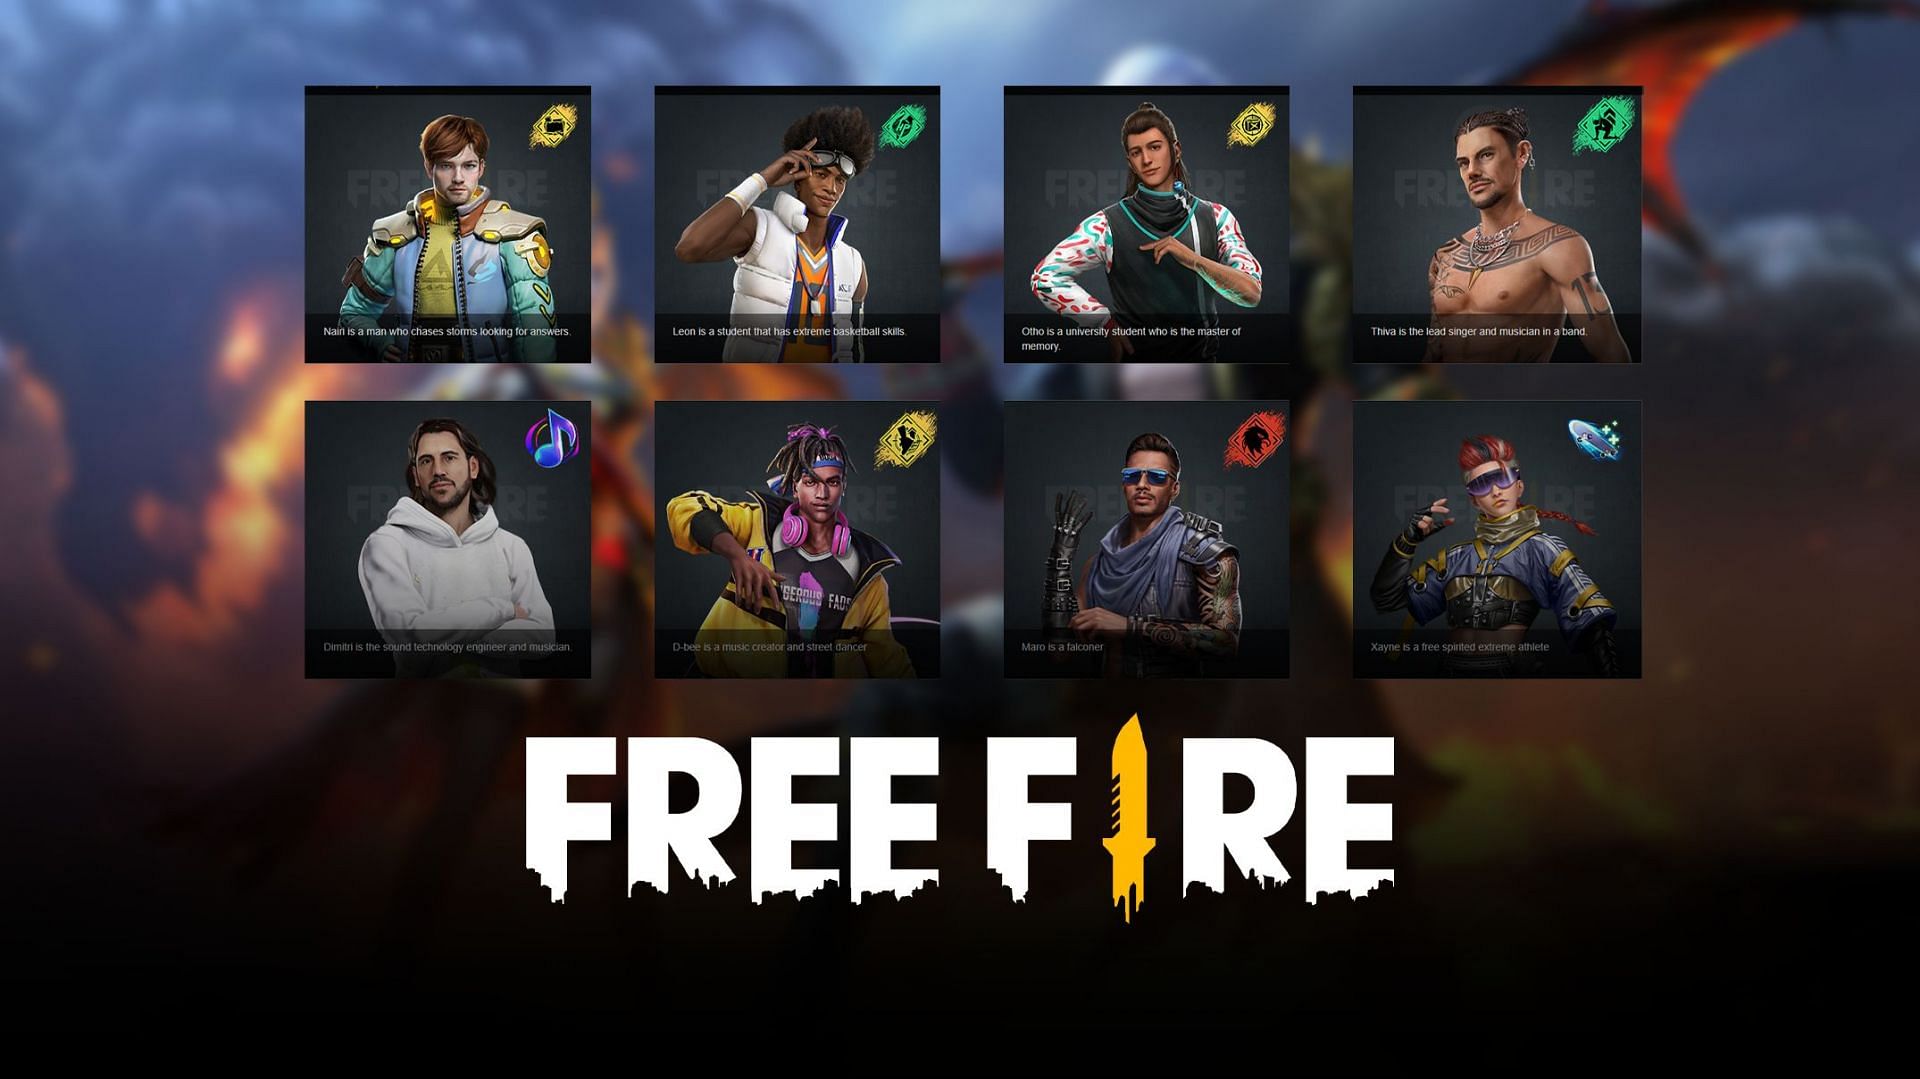 There are a wide variety of characters in Free Fire that players can try out in 2022 (Image via Free Fire)